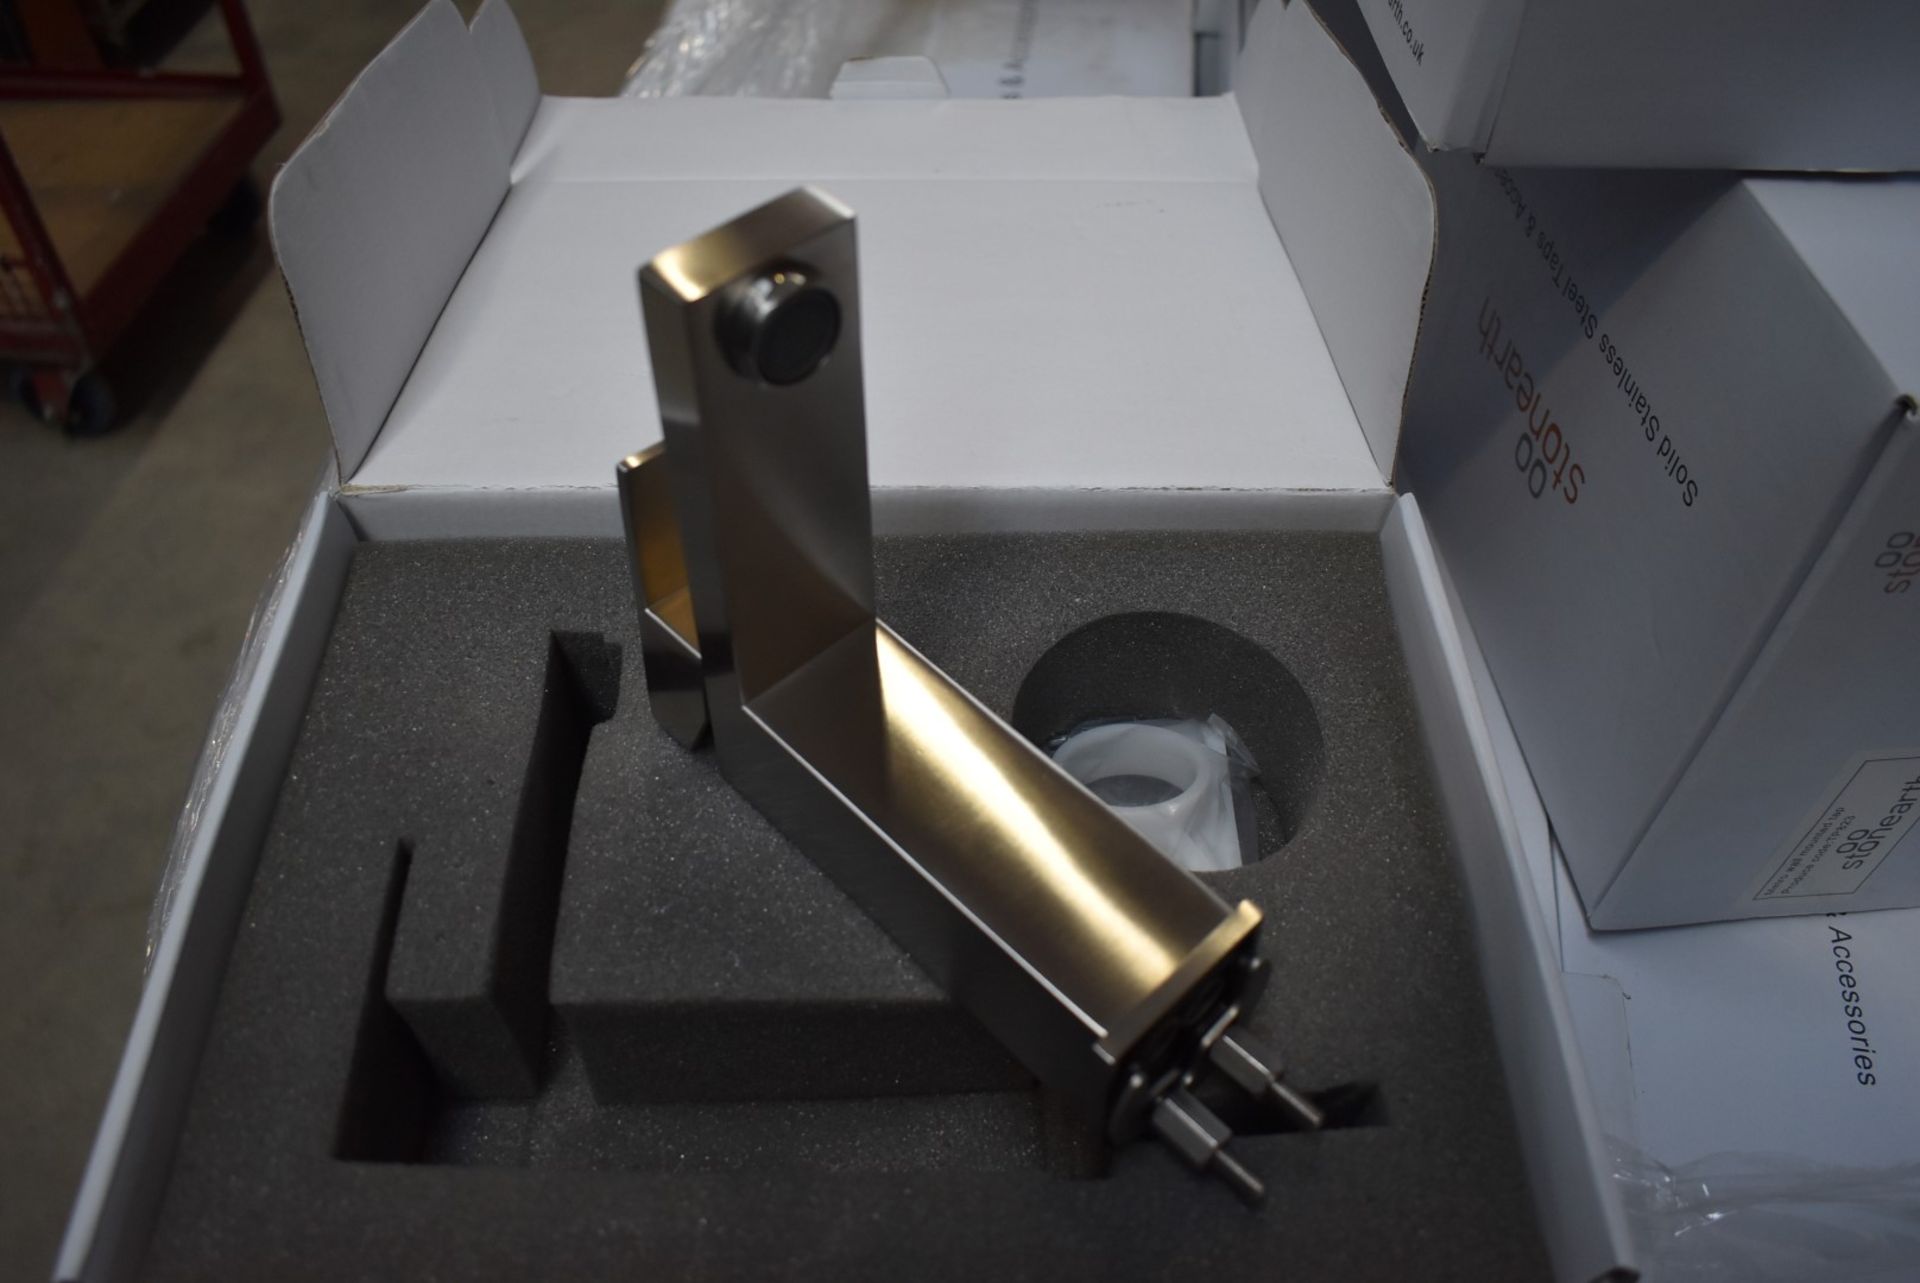 1 x Stonearth 'Metro' Stainless Steel Basin Mixer Tap - Brand New & Boxed - CL713 - RRP £245 - - Image 6 of 8